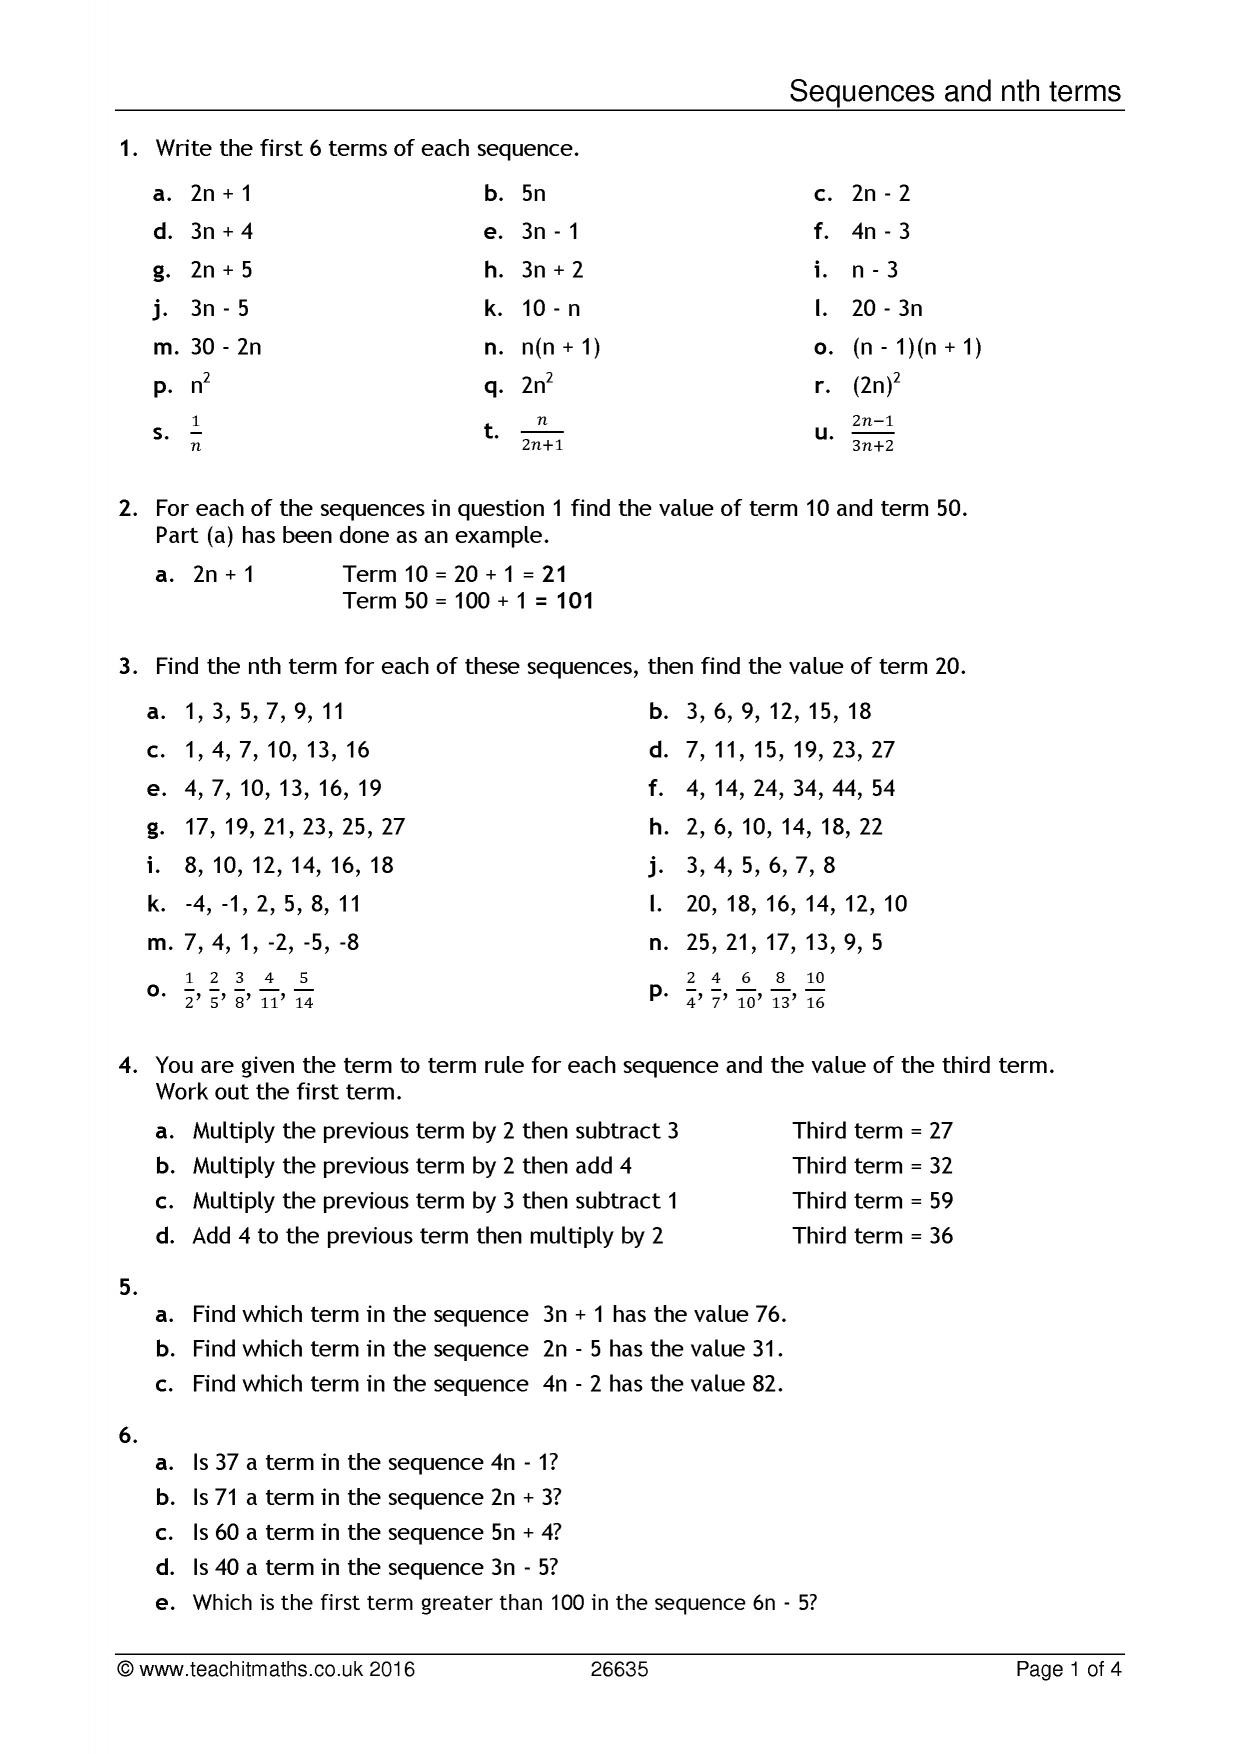 Geometric Sequences Worksheet Answers Sequences and Nth Terms Worksheet [pdf] Teachit Maths